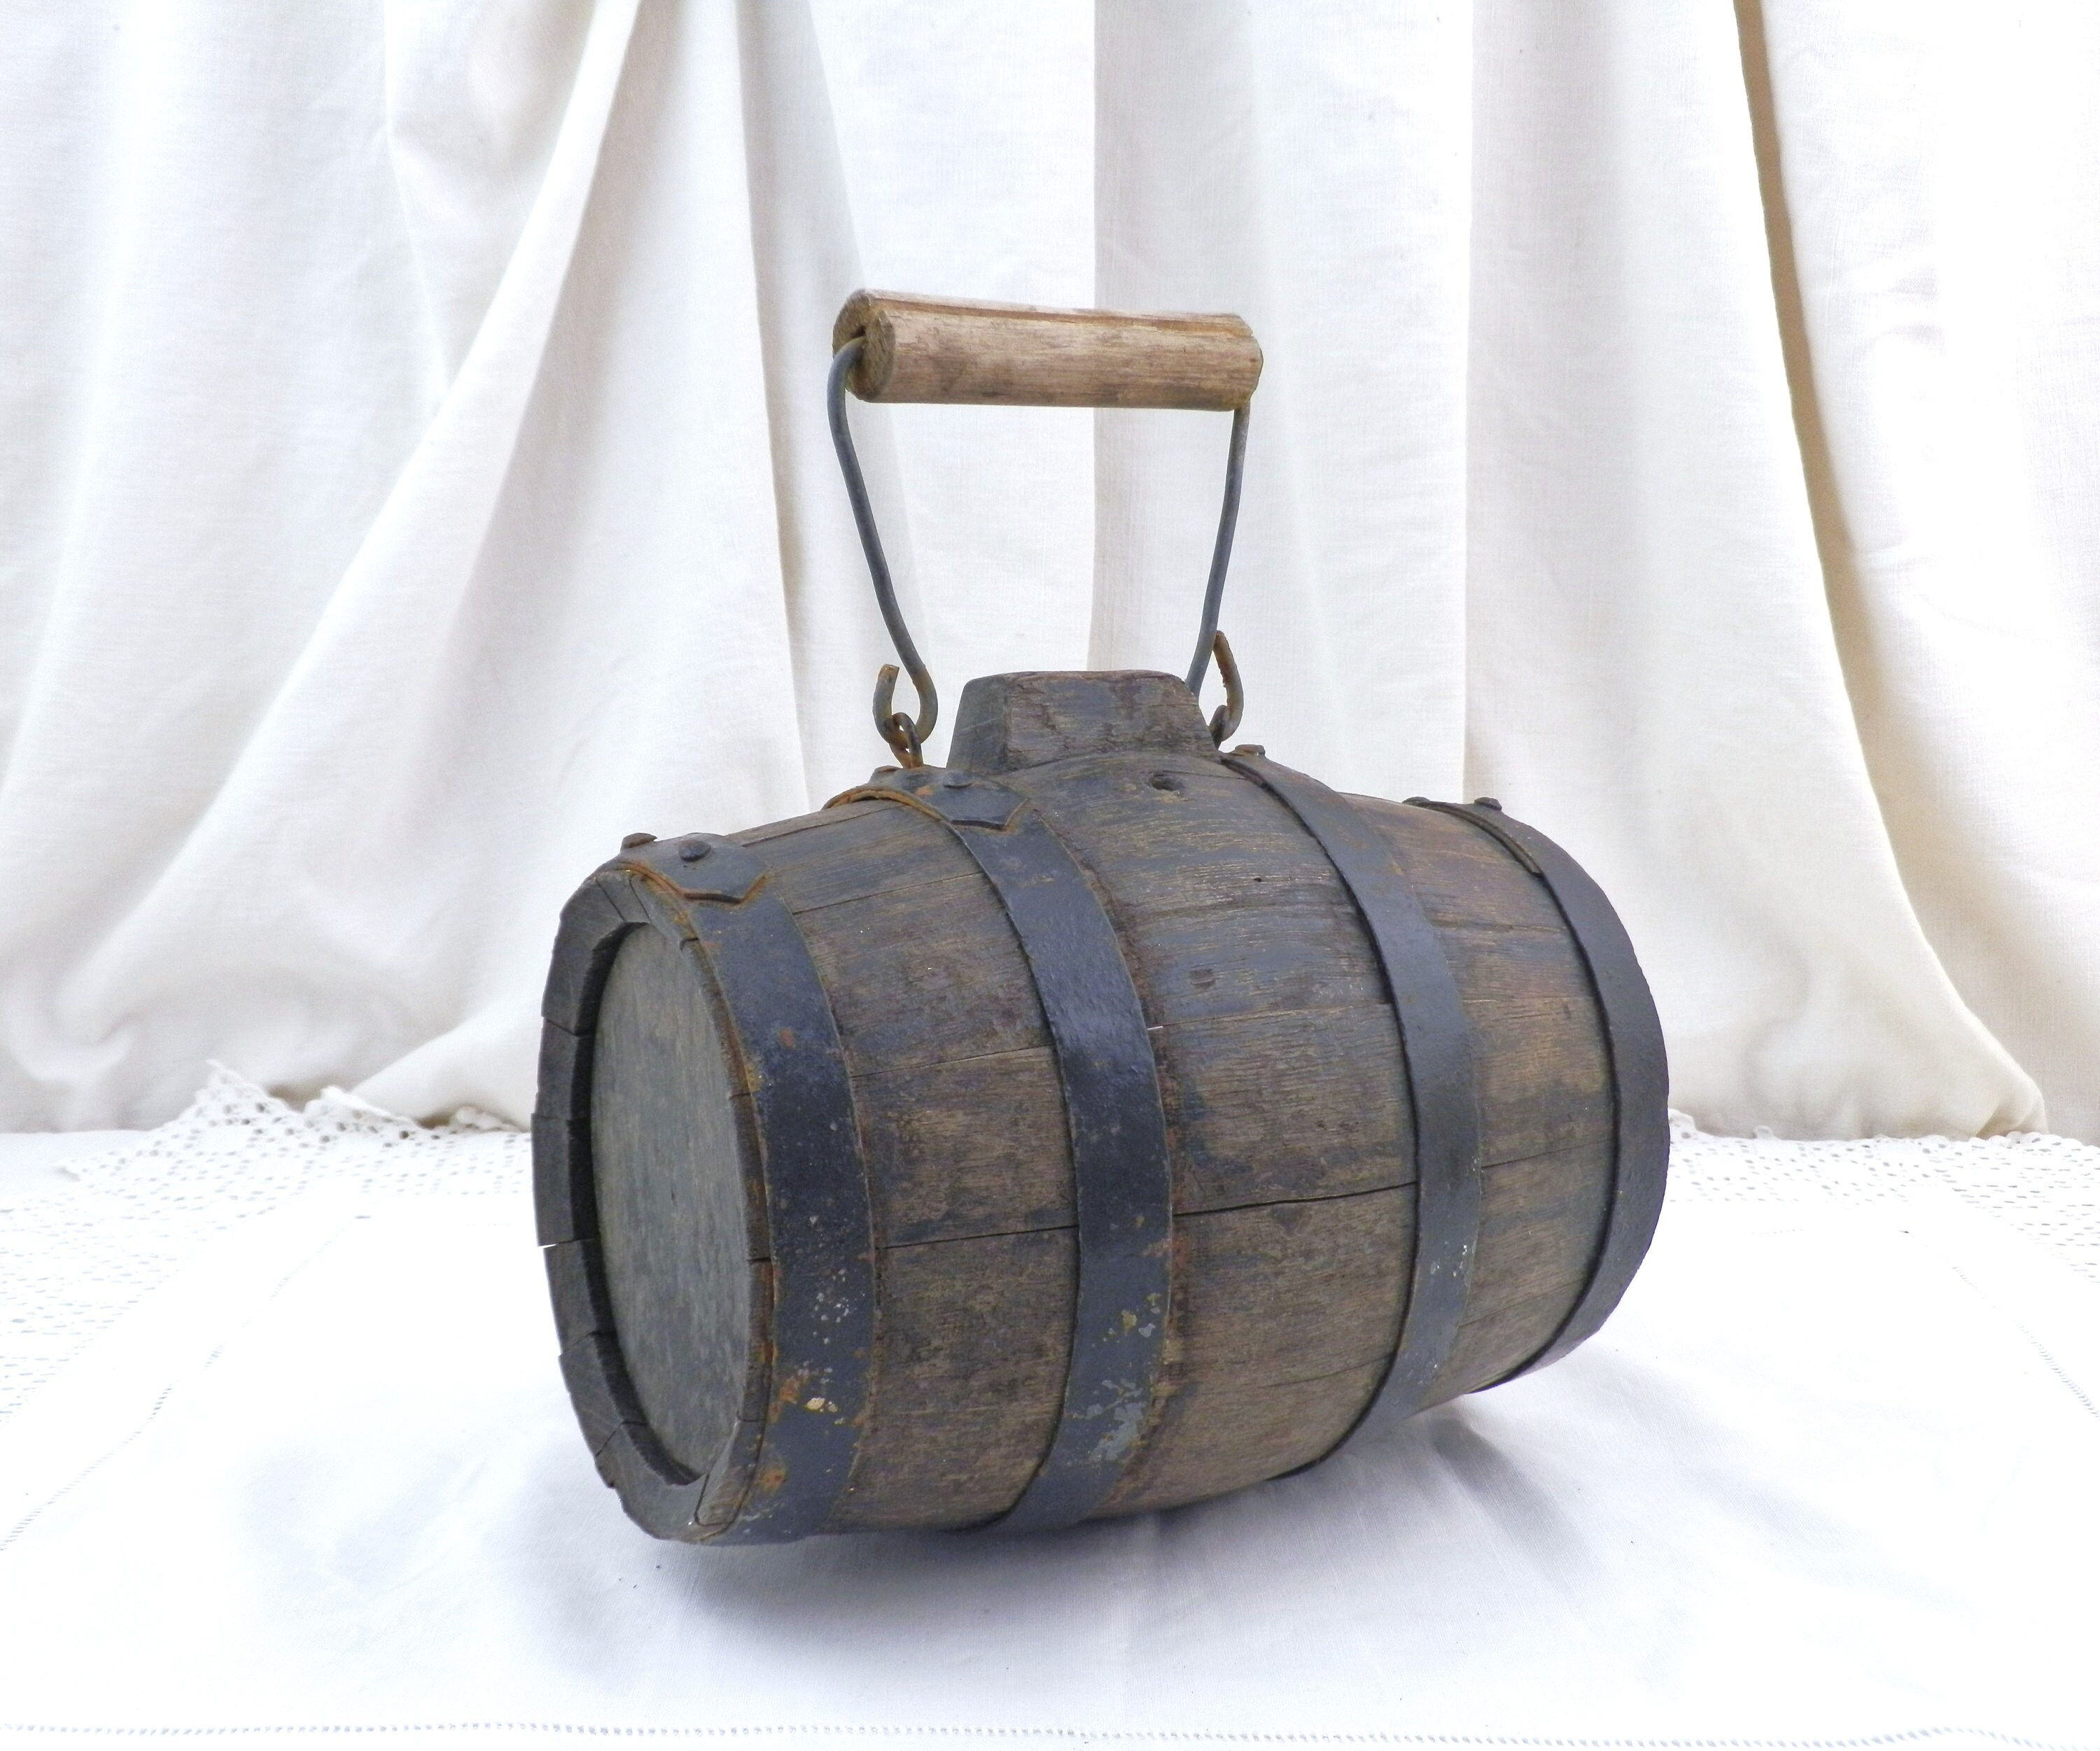 Antique Iron Small Bucket Wine Barrel with Handle - China Metal